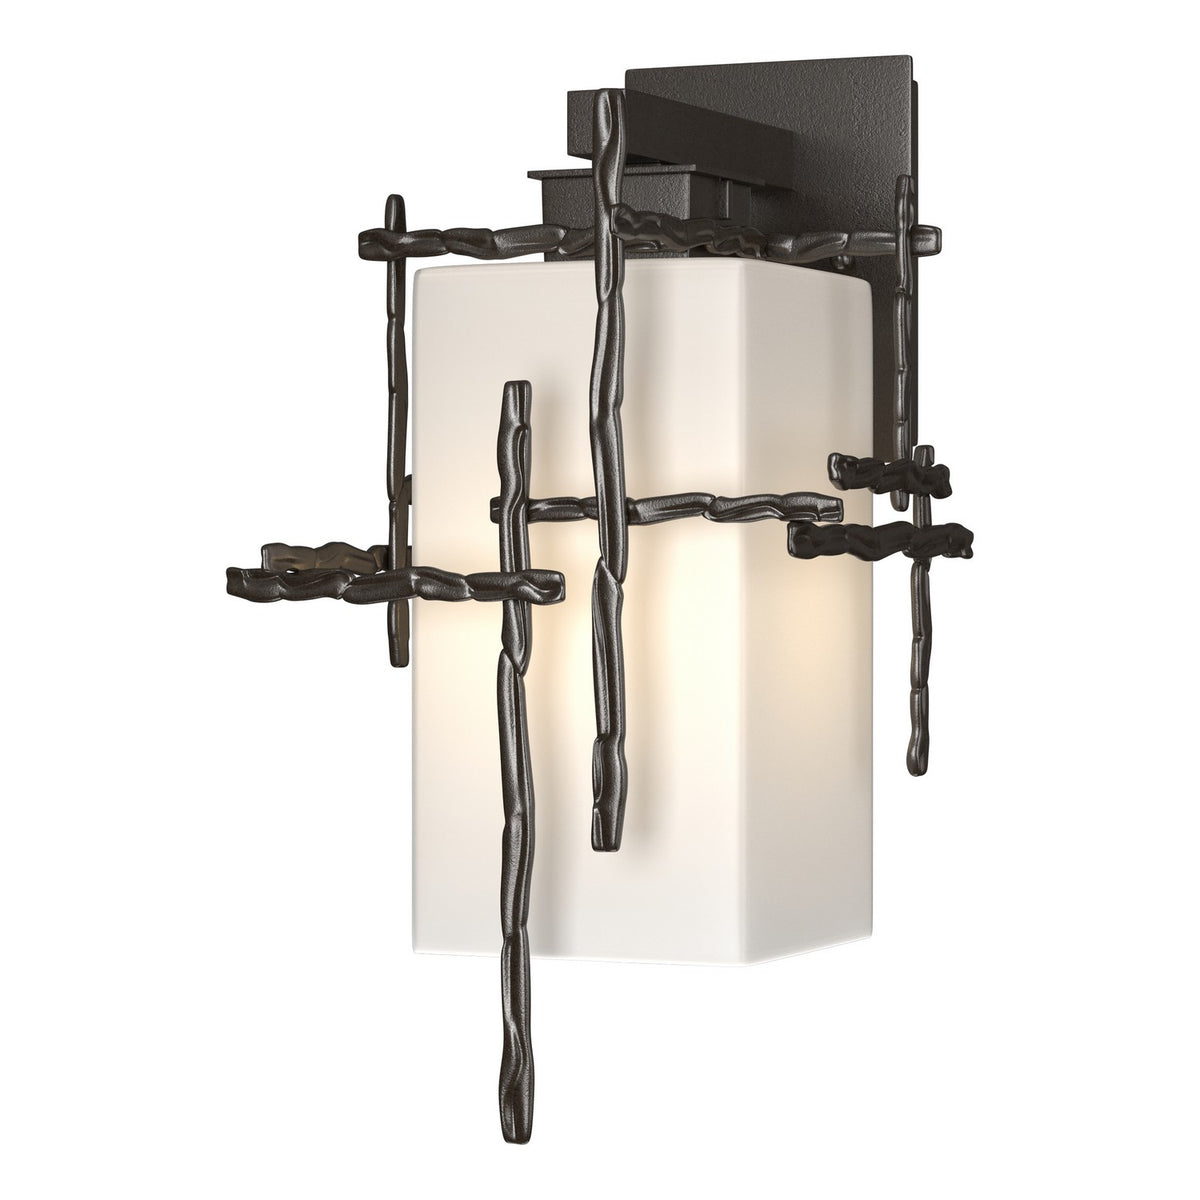 Hubbardton Forge - 302581-SKT-14-GG0093 - One Light Outdoor Wall Sconce - Tura - Coastal Oil Rubbed Bronze